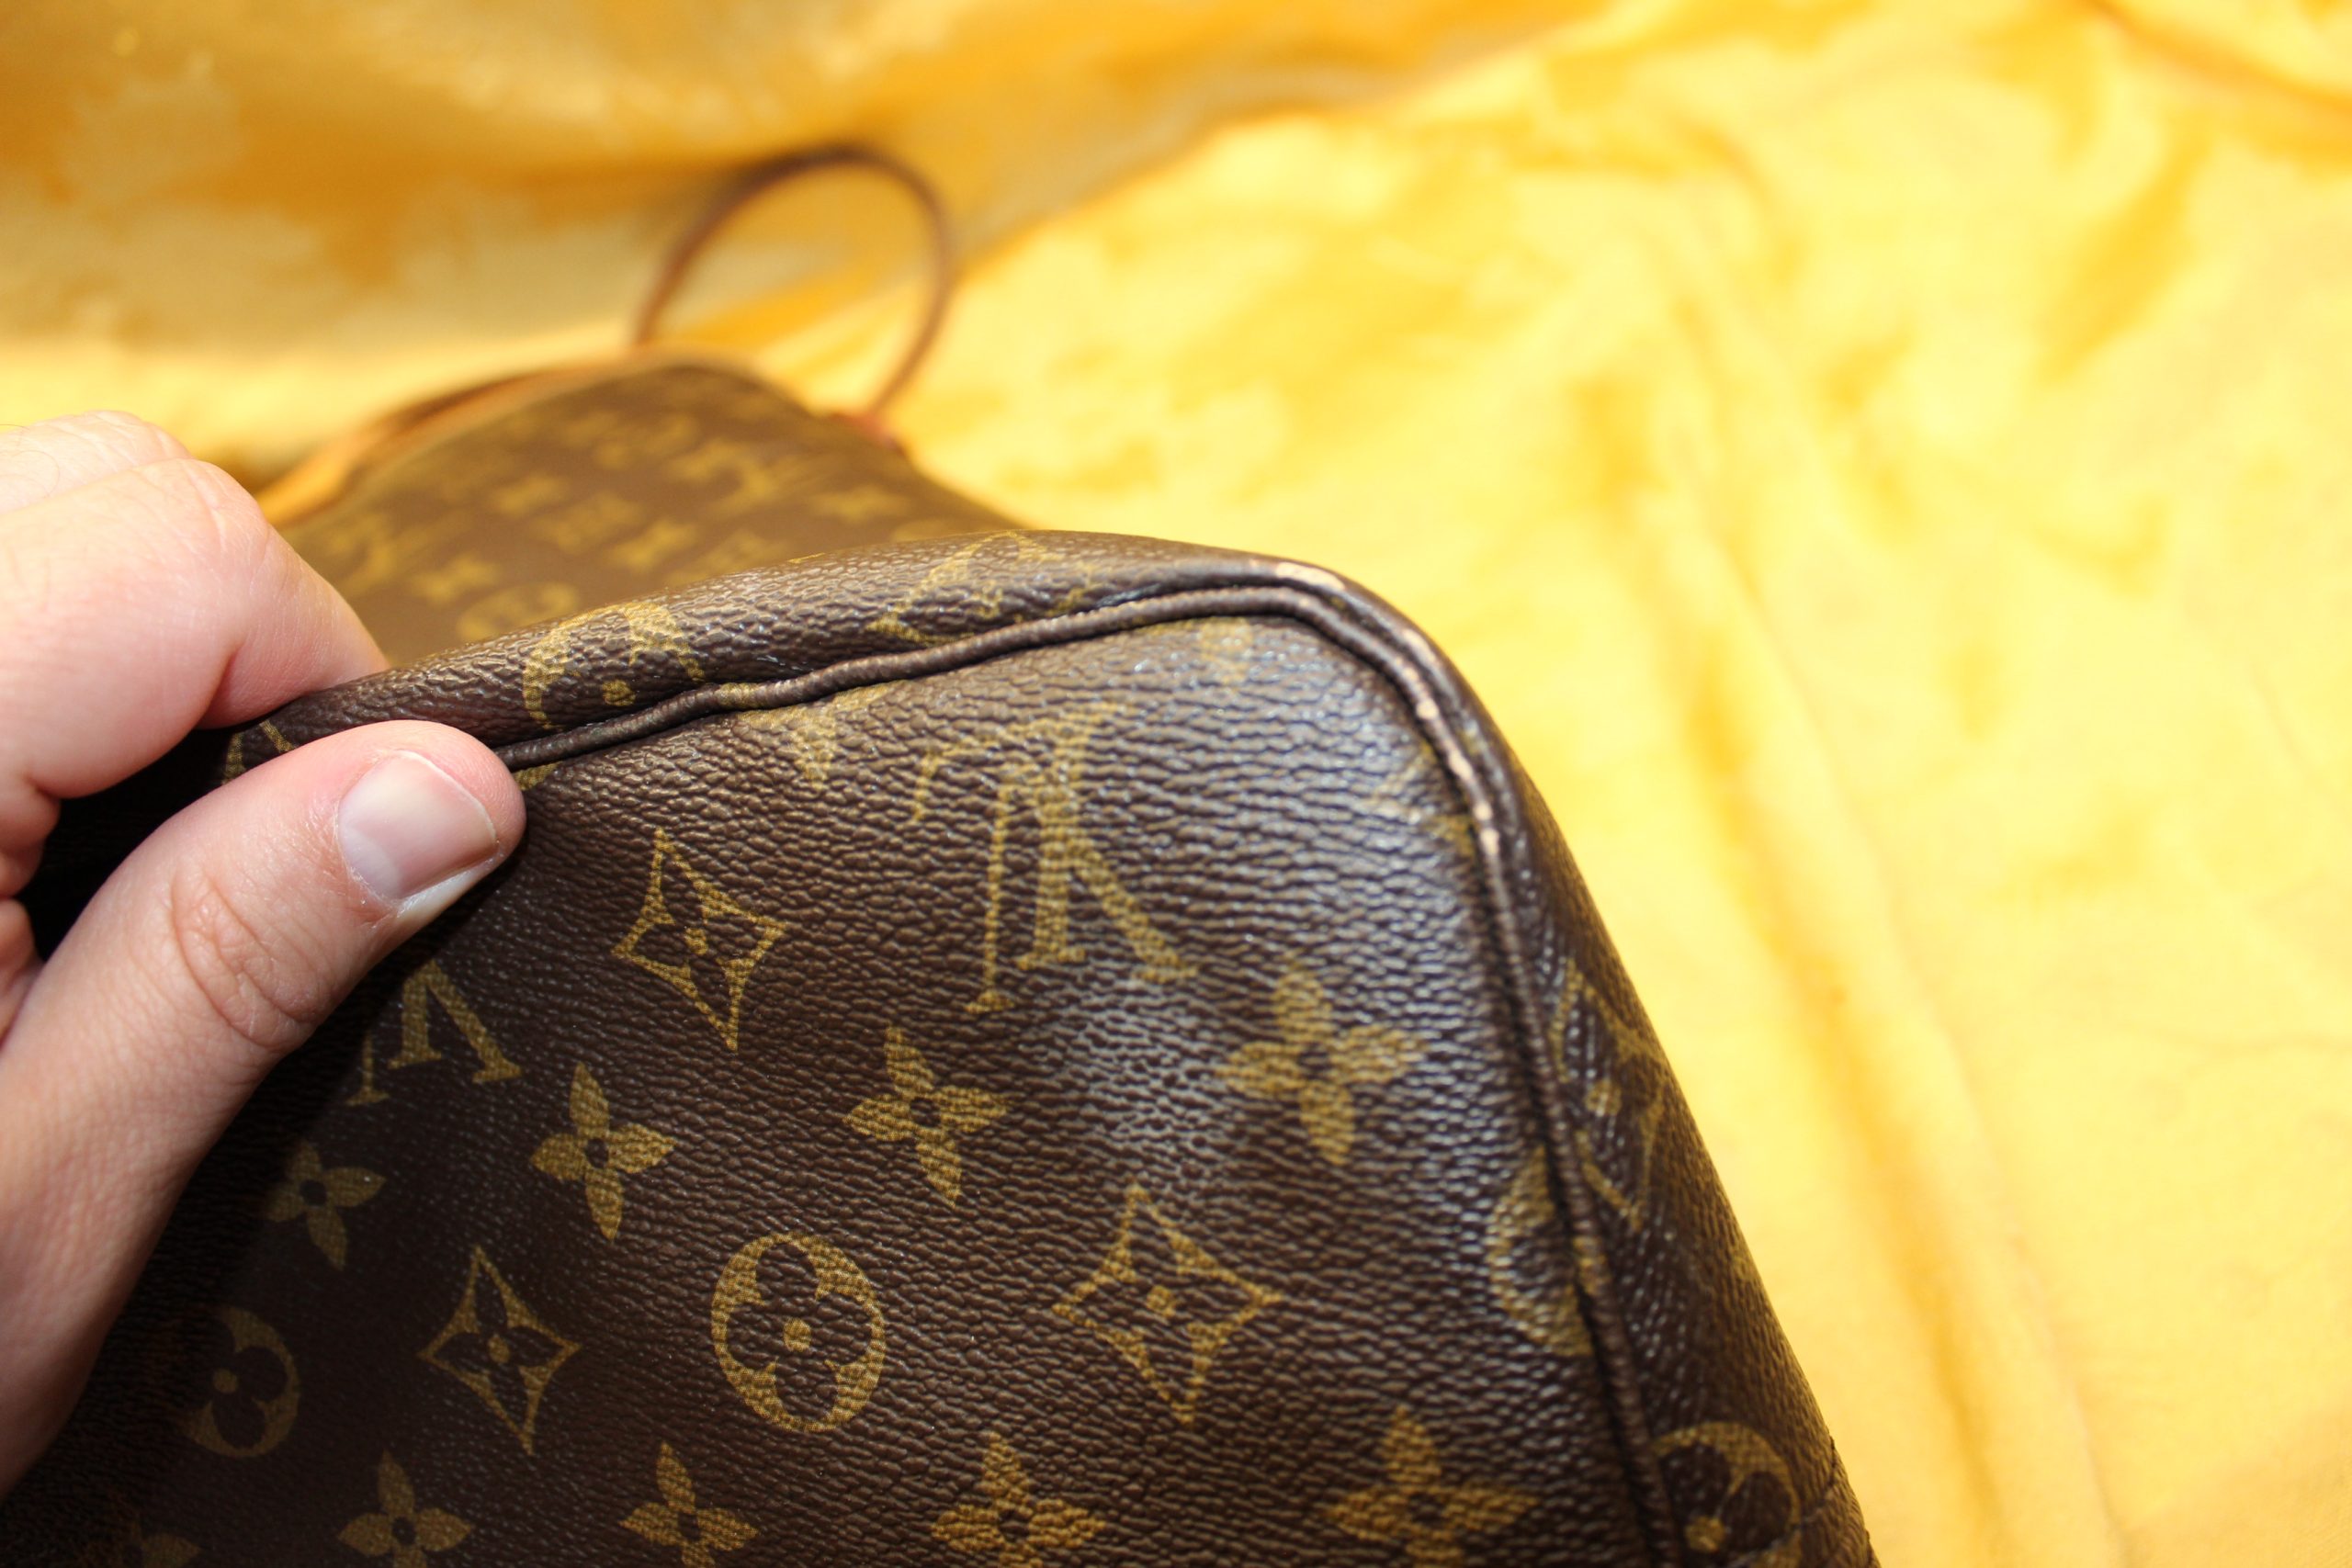 Pre-Owned Louis Vuitton Neverfull GM Monogram GM Brown 